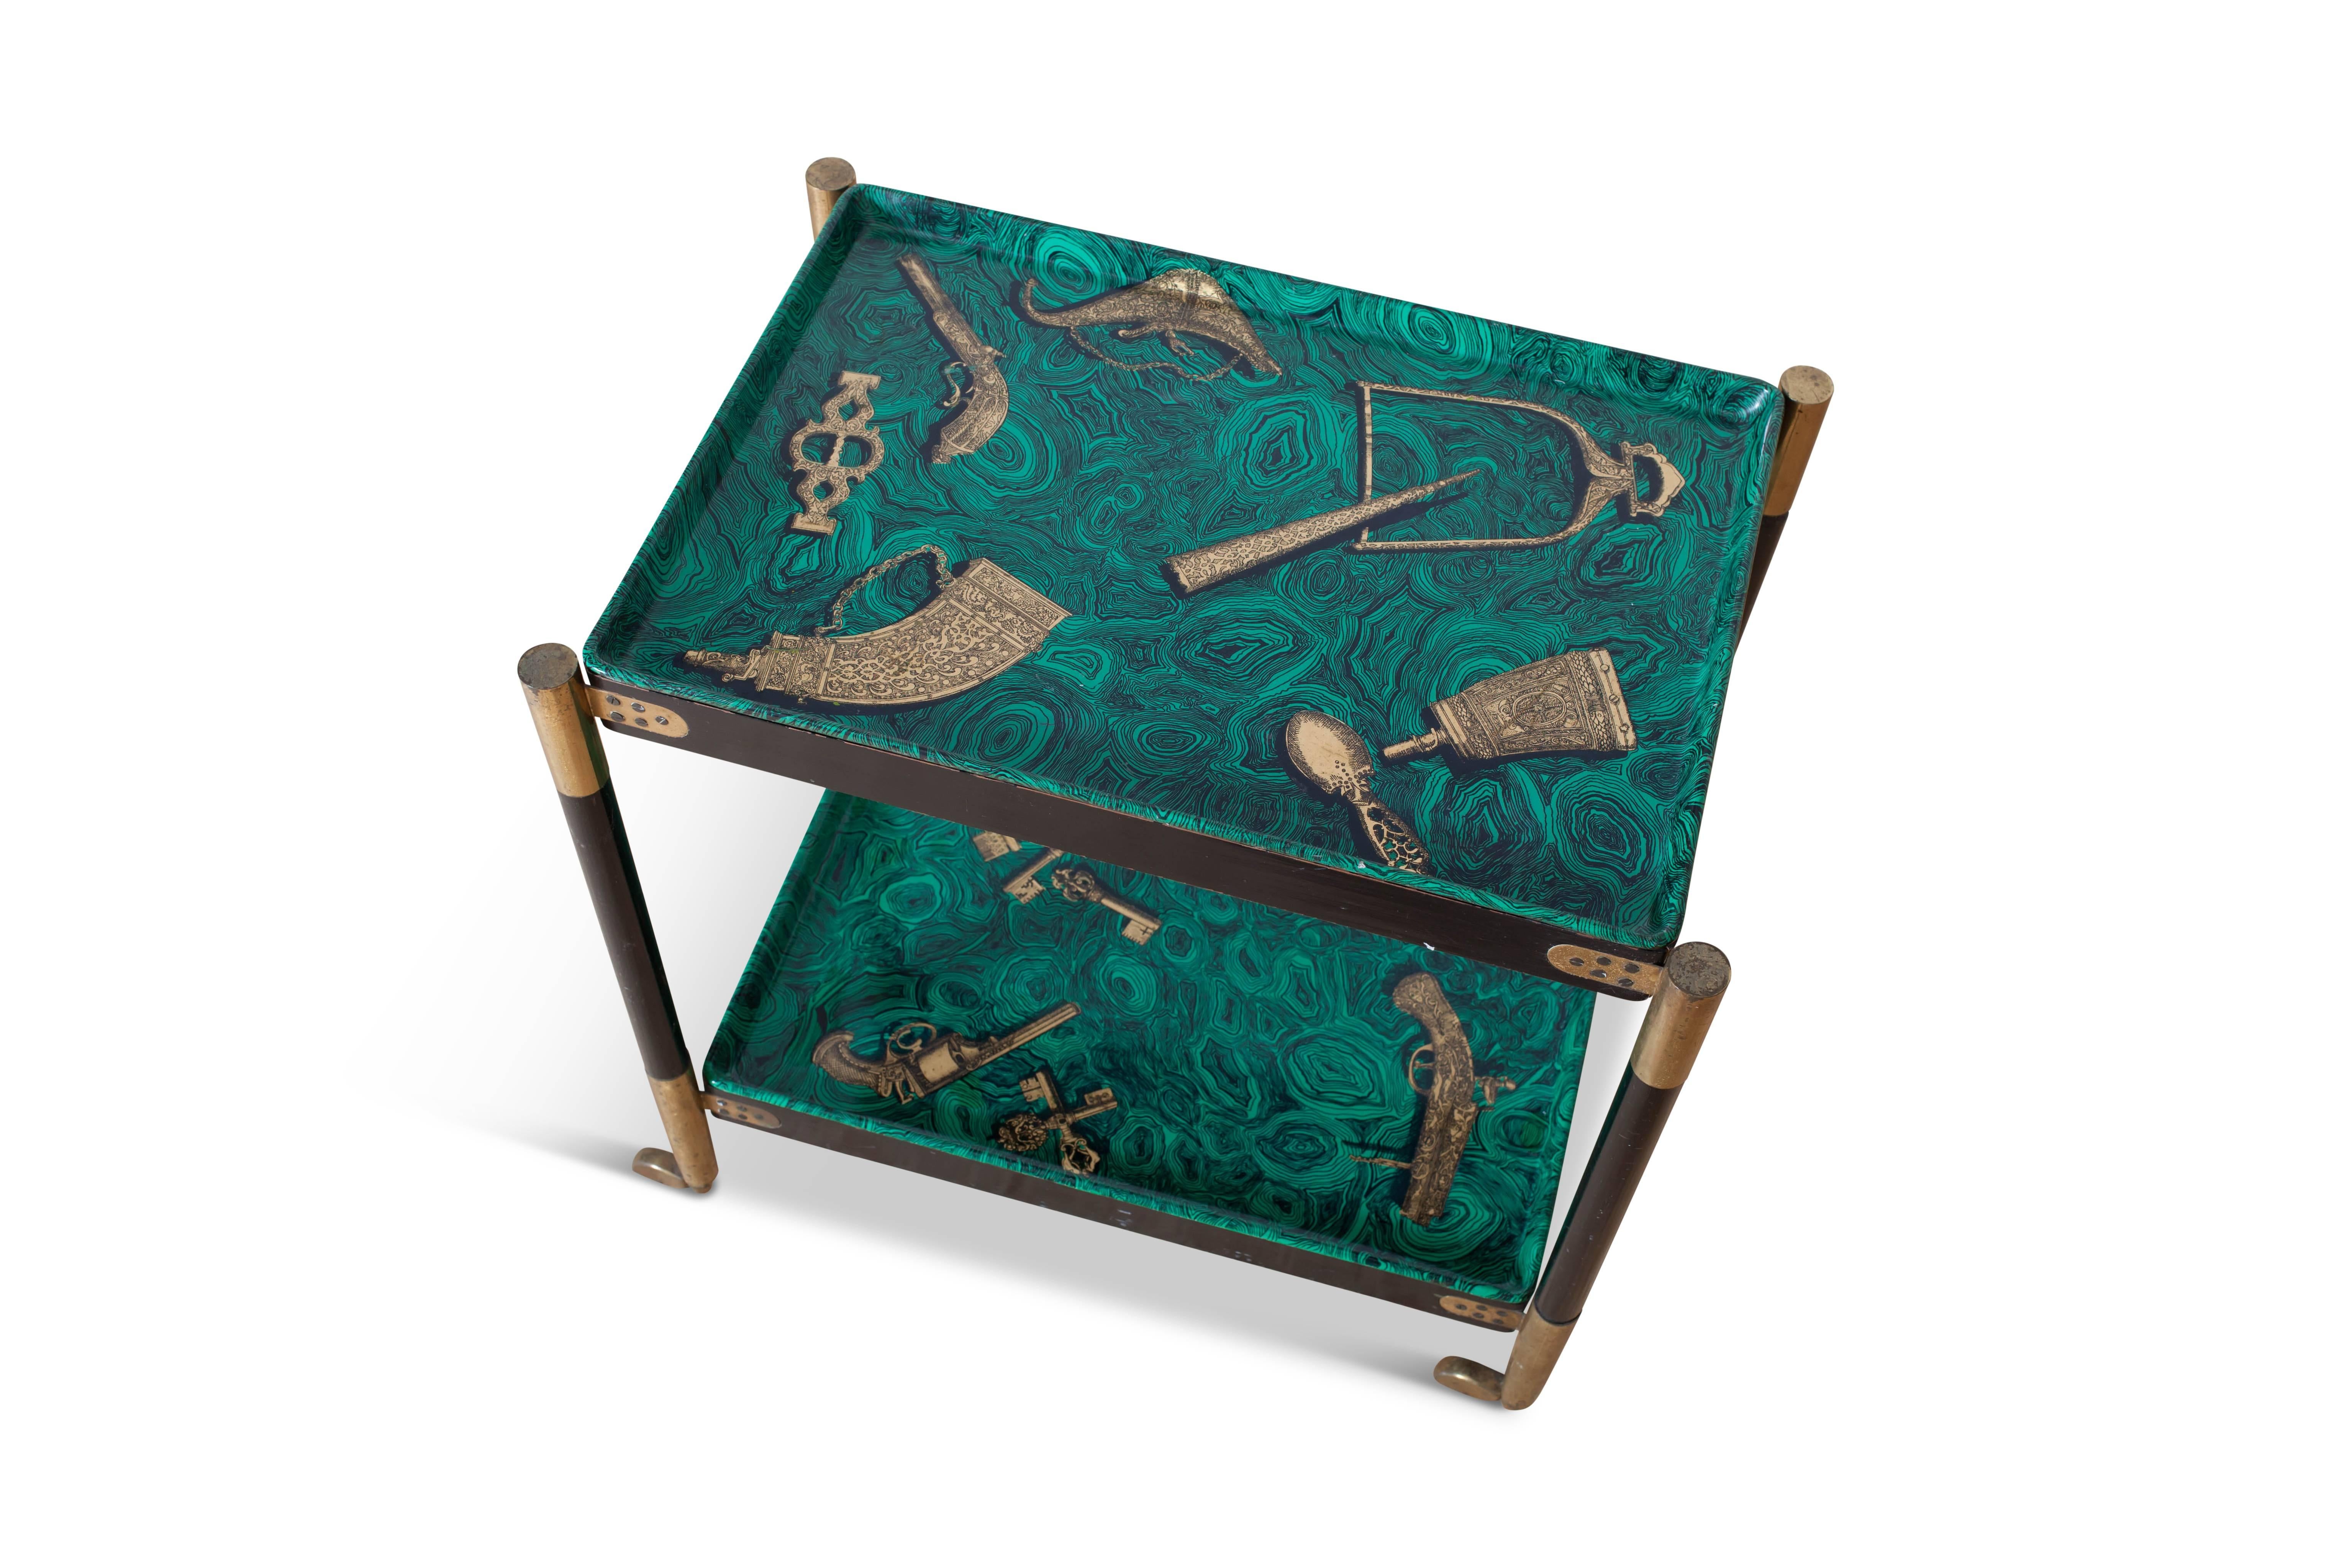 Stunning serving or bar cart by Italian designer Piero Fornasetti, Italy, 1960s

The frame consists of black lacquered wood with brass hinges and wheels.
The two interchangeable trays show images of 18th century pistols and attributes
in gold